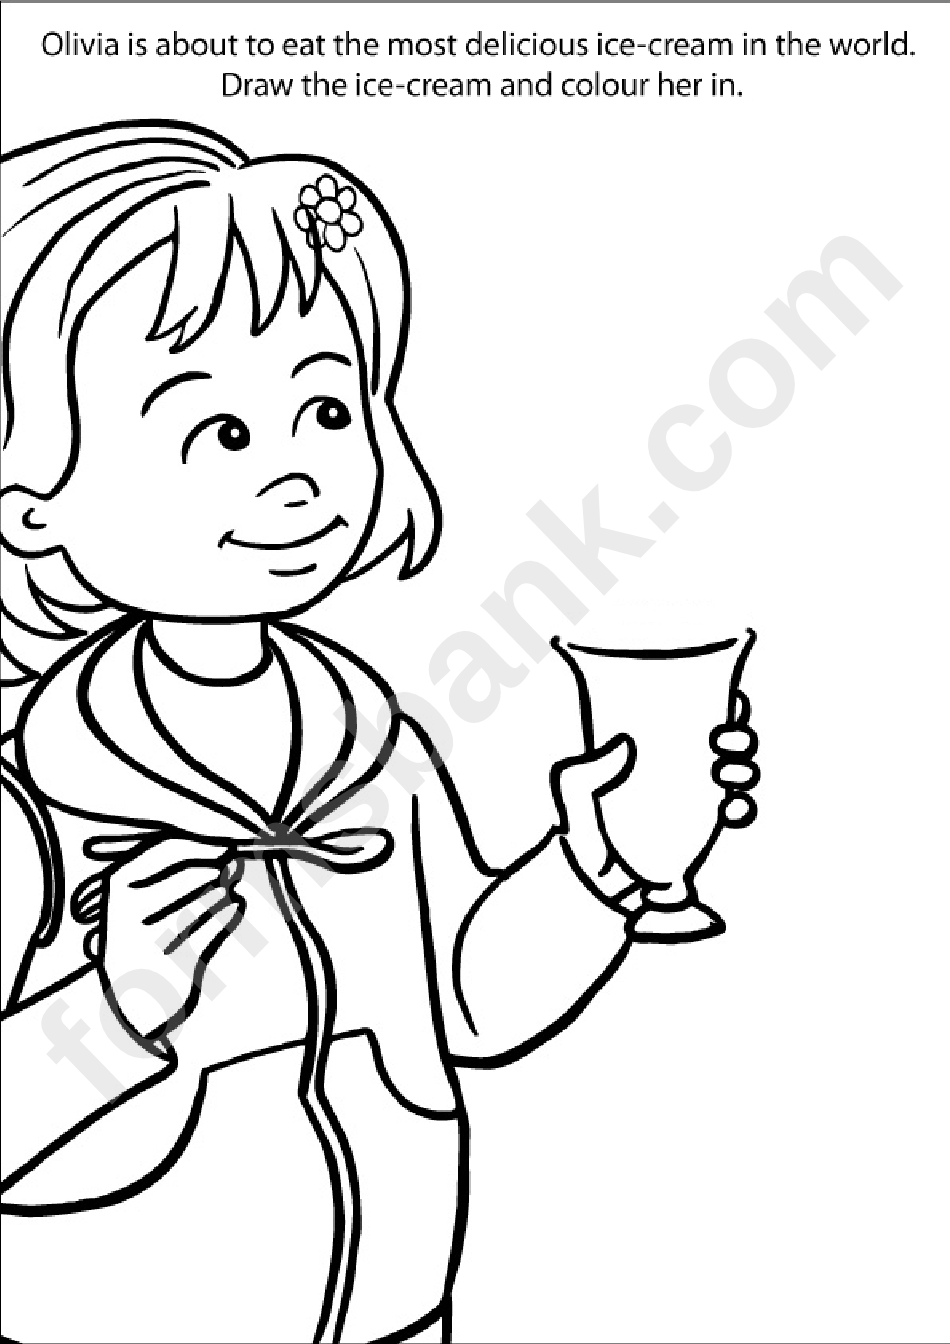 Olivia And Ice-Cream Coloring Sheet